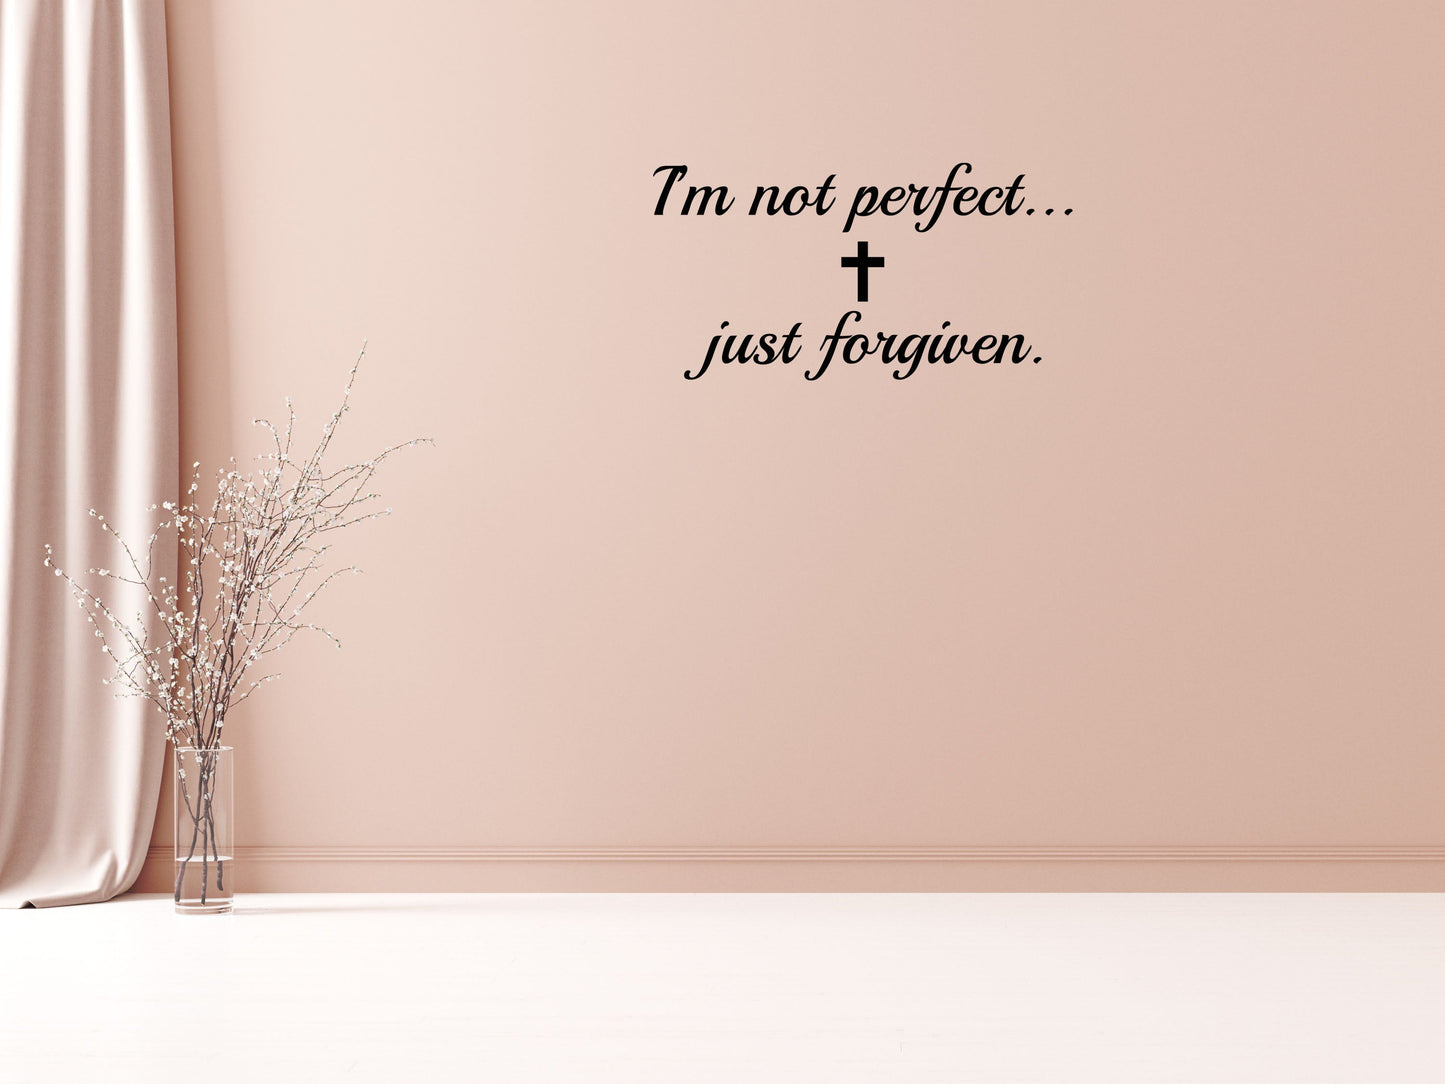 I'm Not Perfect Just Forgiven Vinyl Decal Wall Decal Custom Wall Custom Quote Verse Wall Decal Home Just Forgiven Sign Just Forgiven Decal Vinyl Wall Decal Done 